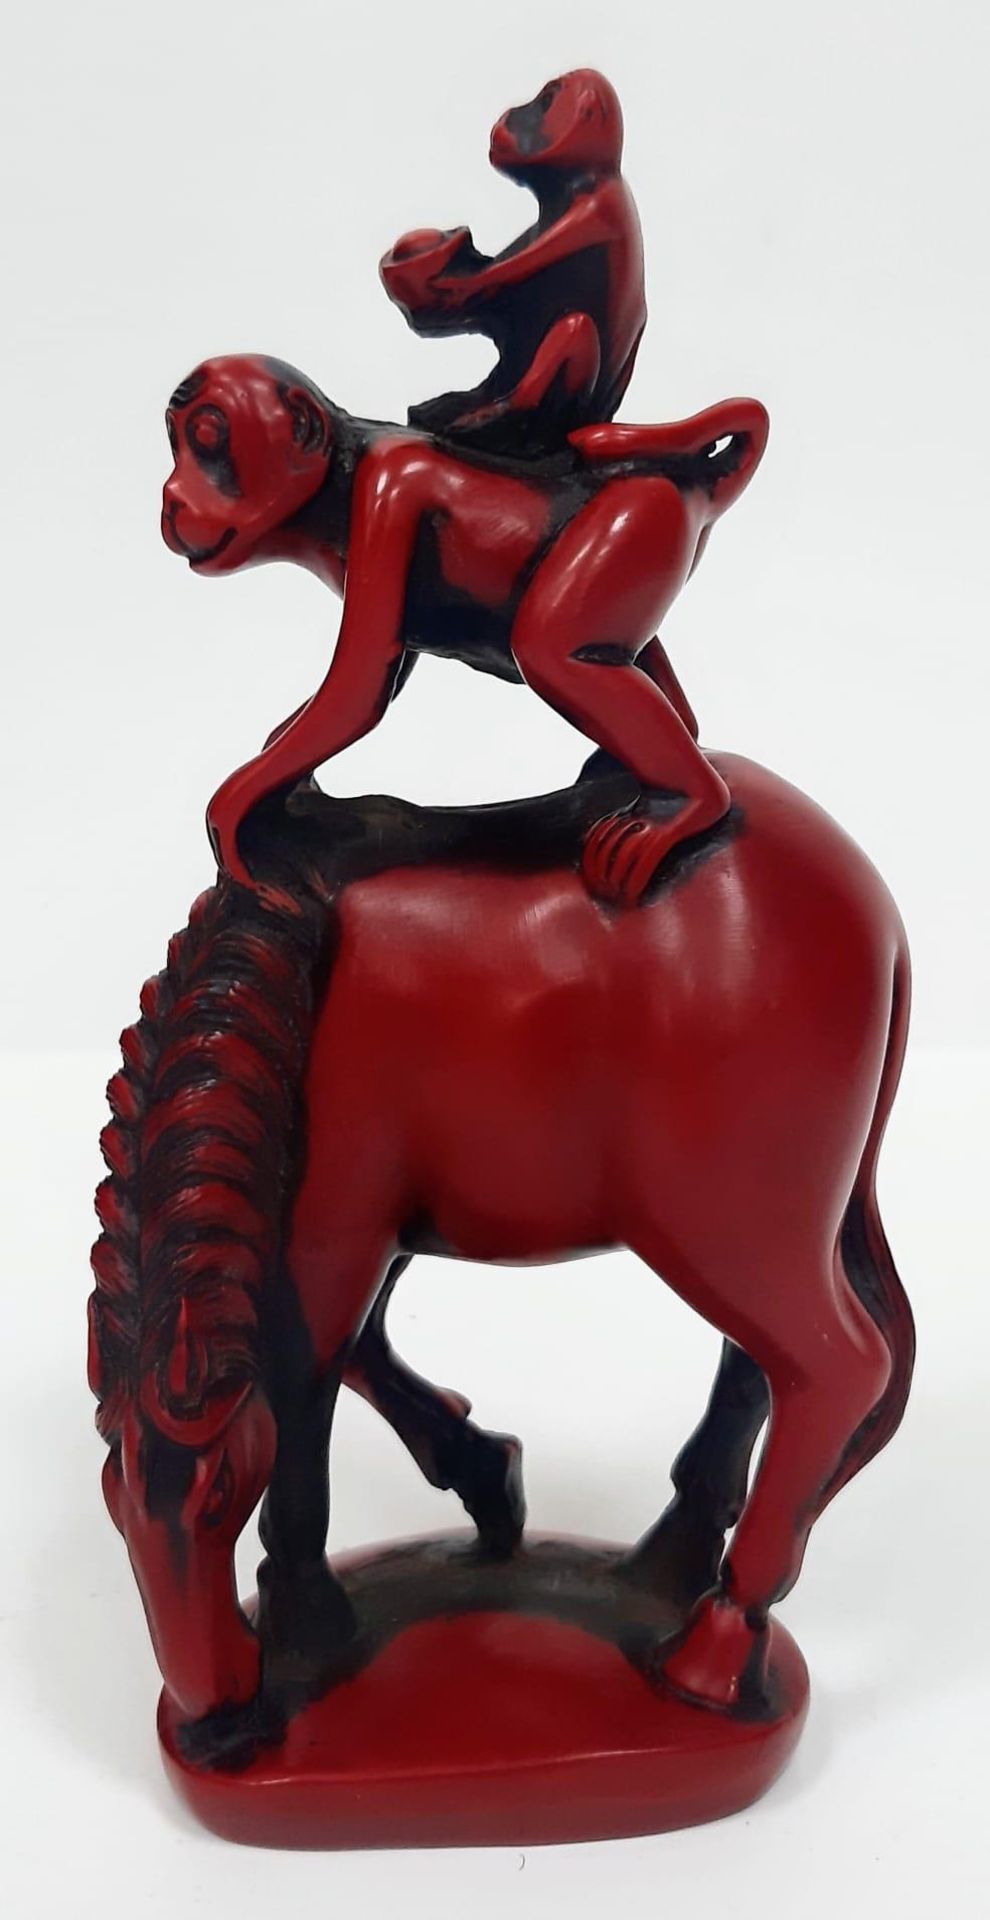 A Coral Red Carved Figurine of two Monkeys on a Horse. Stands 16.5cm tall by 6cm wide.